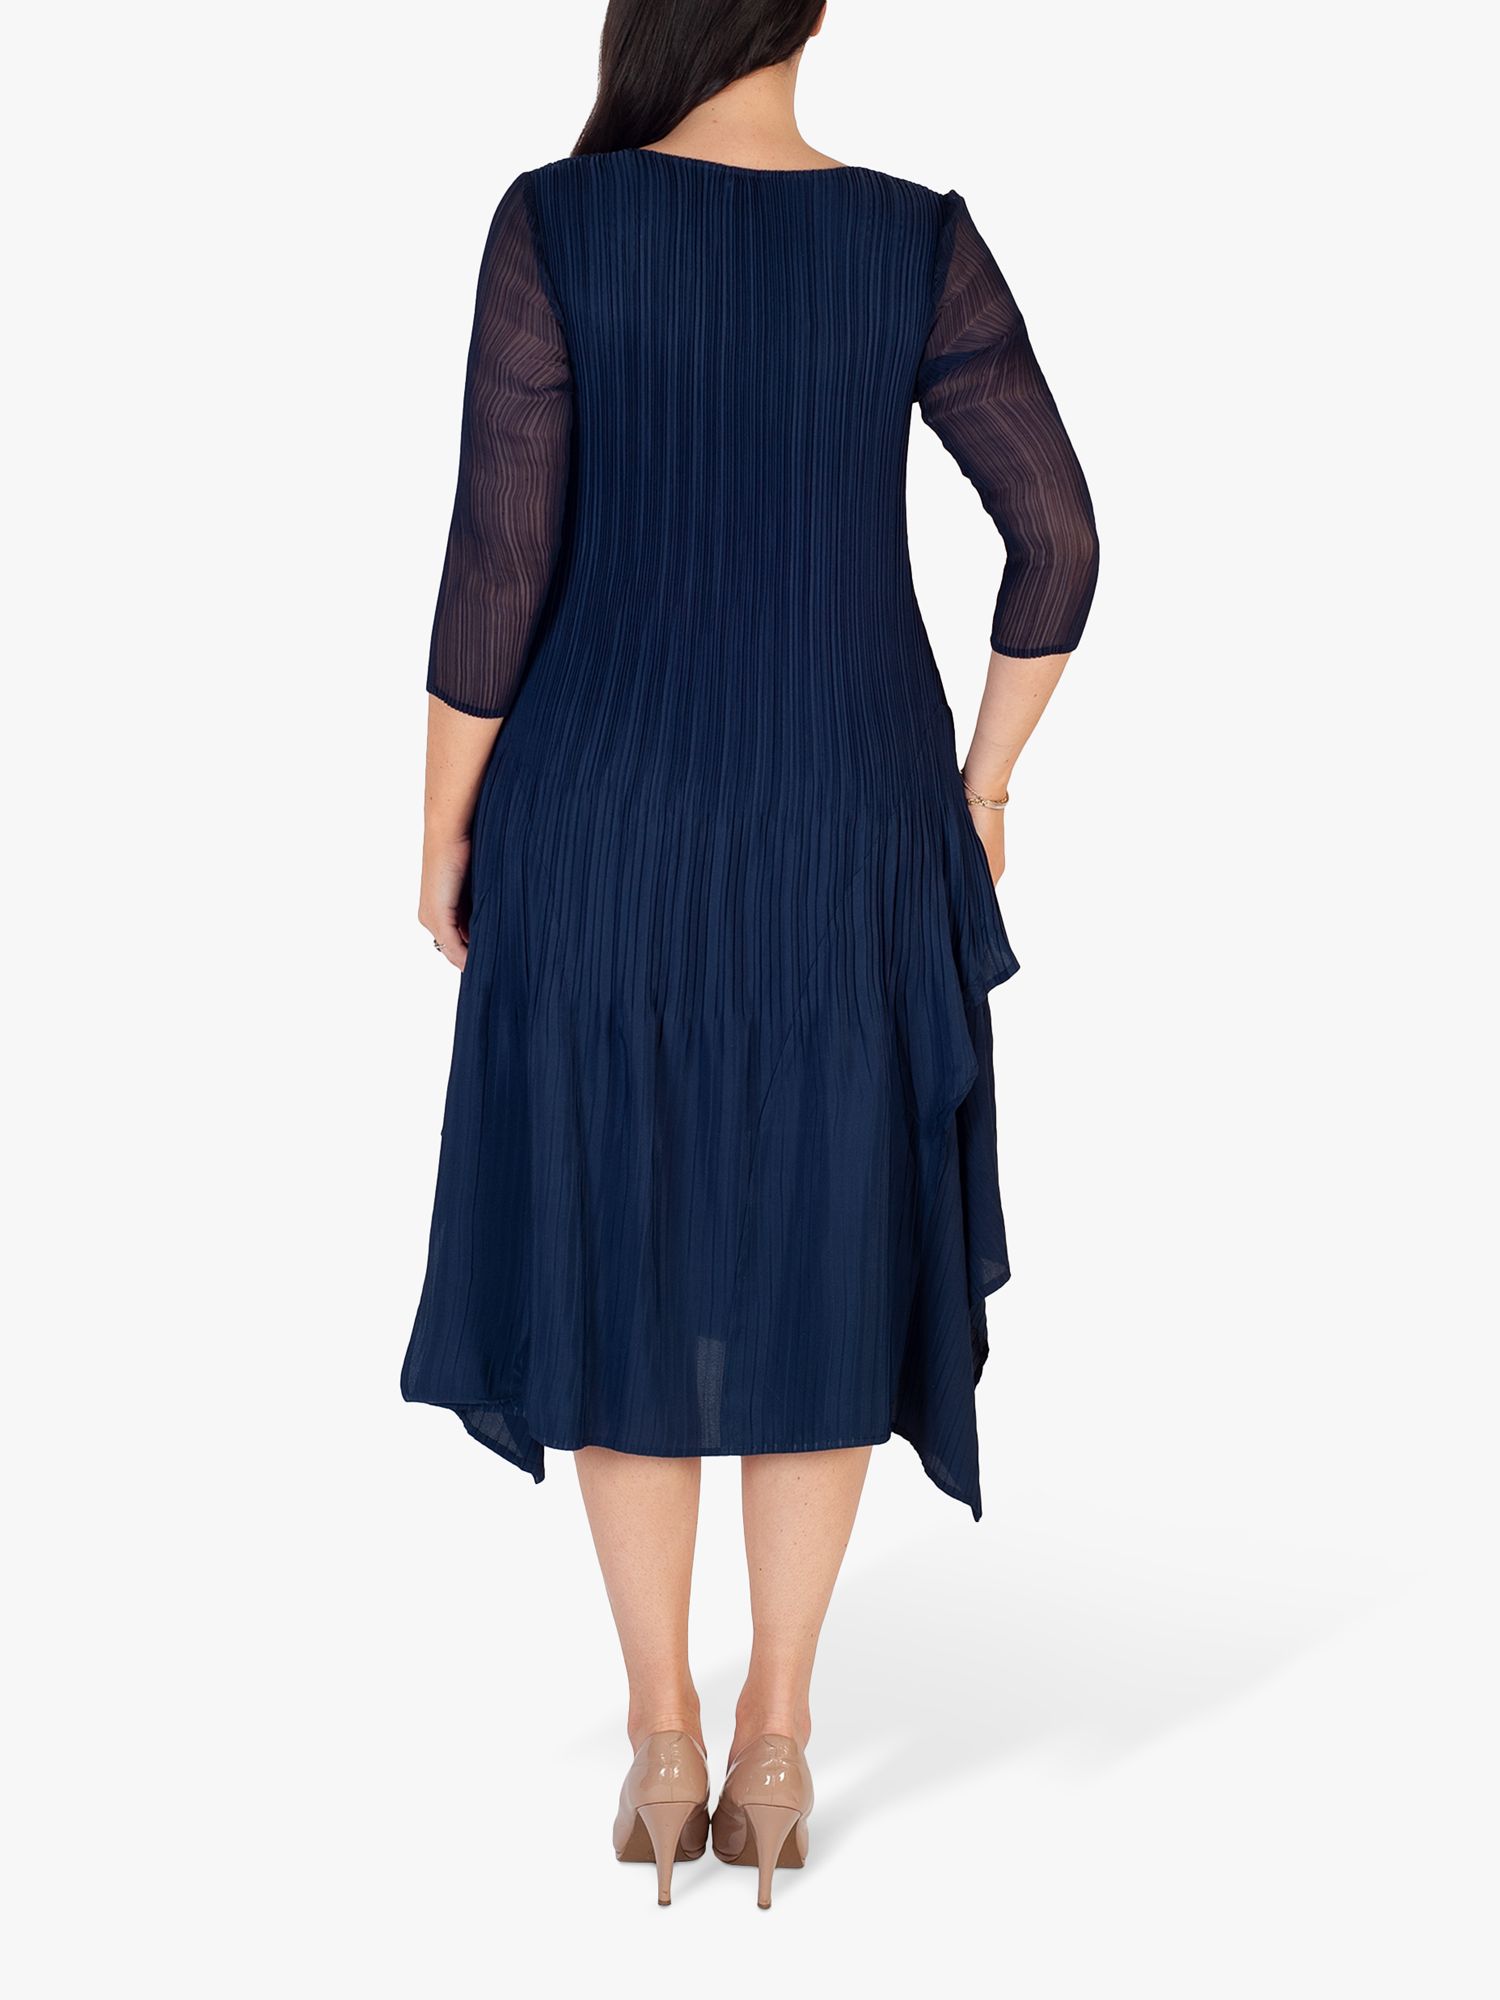 chesca Crush Pleat Layered Dress, Navy at John Lewis & Partners